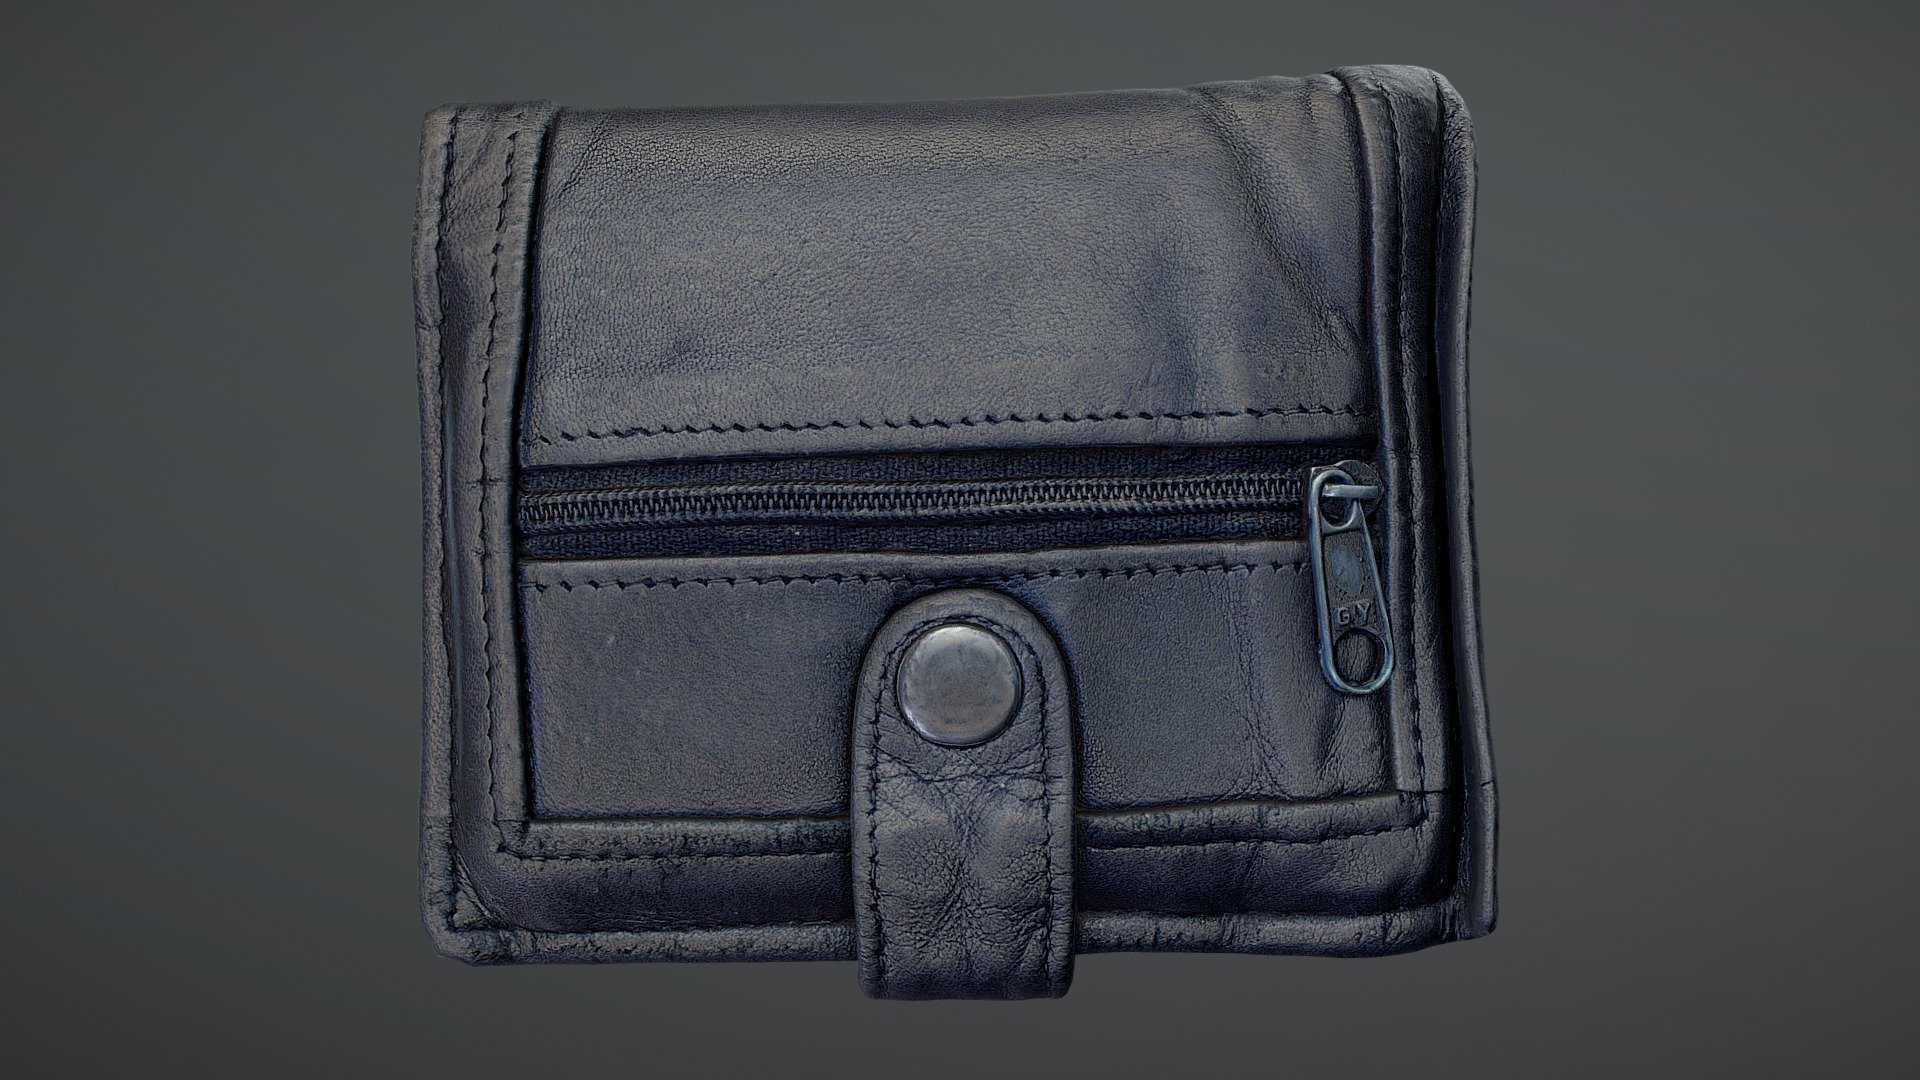 Men's leather wallet scan. Cleaned and repaired mesh, automatic retopology, PBR textures authored 3d model